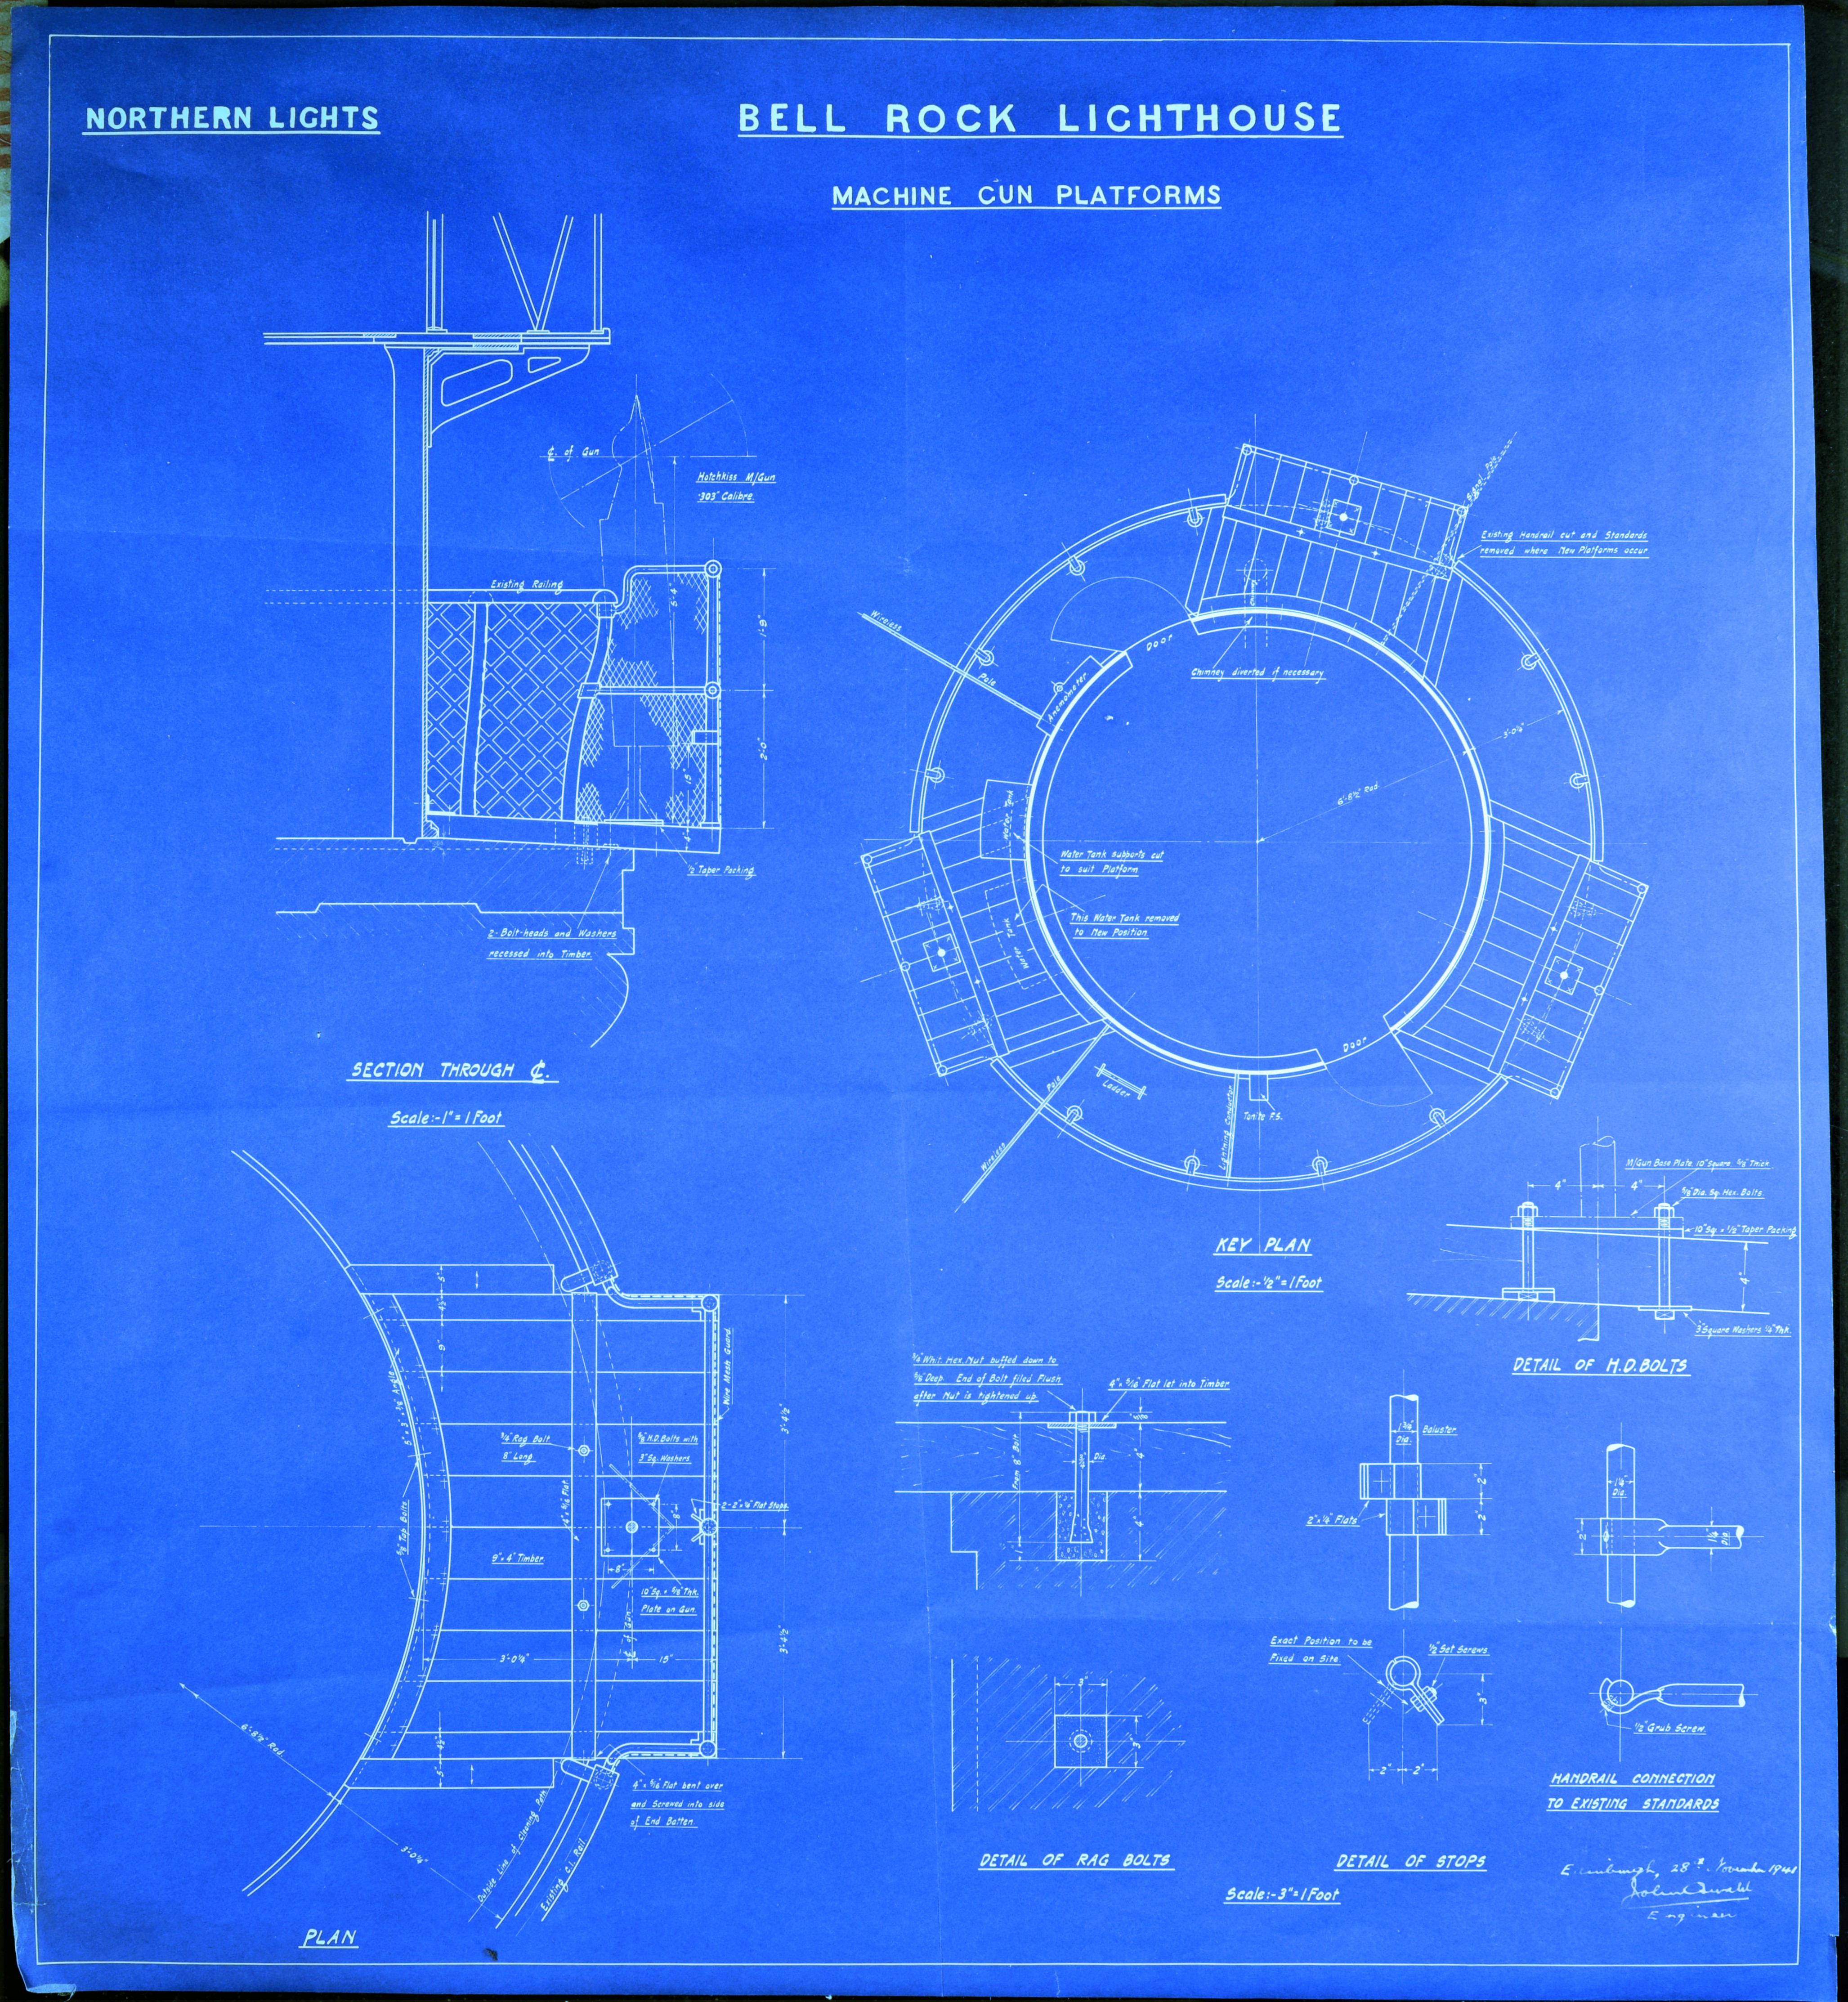 Plan of the Bell Rock Lighthouse balcony, showing where the machine gun platforms will be positioned.